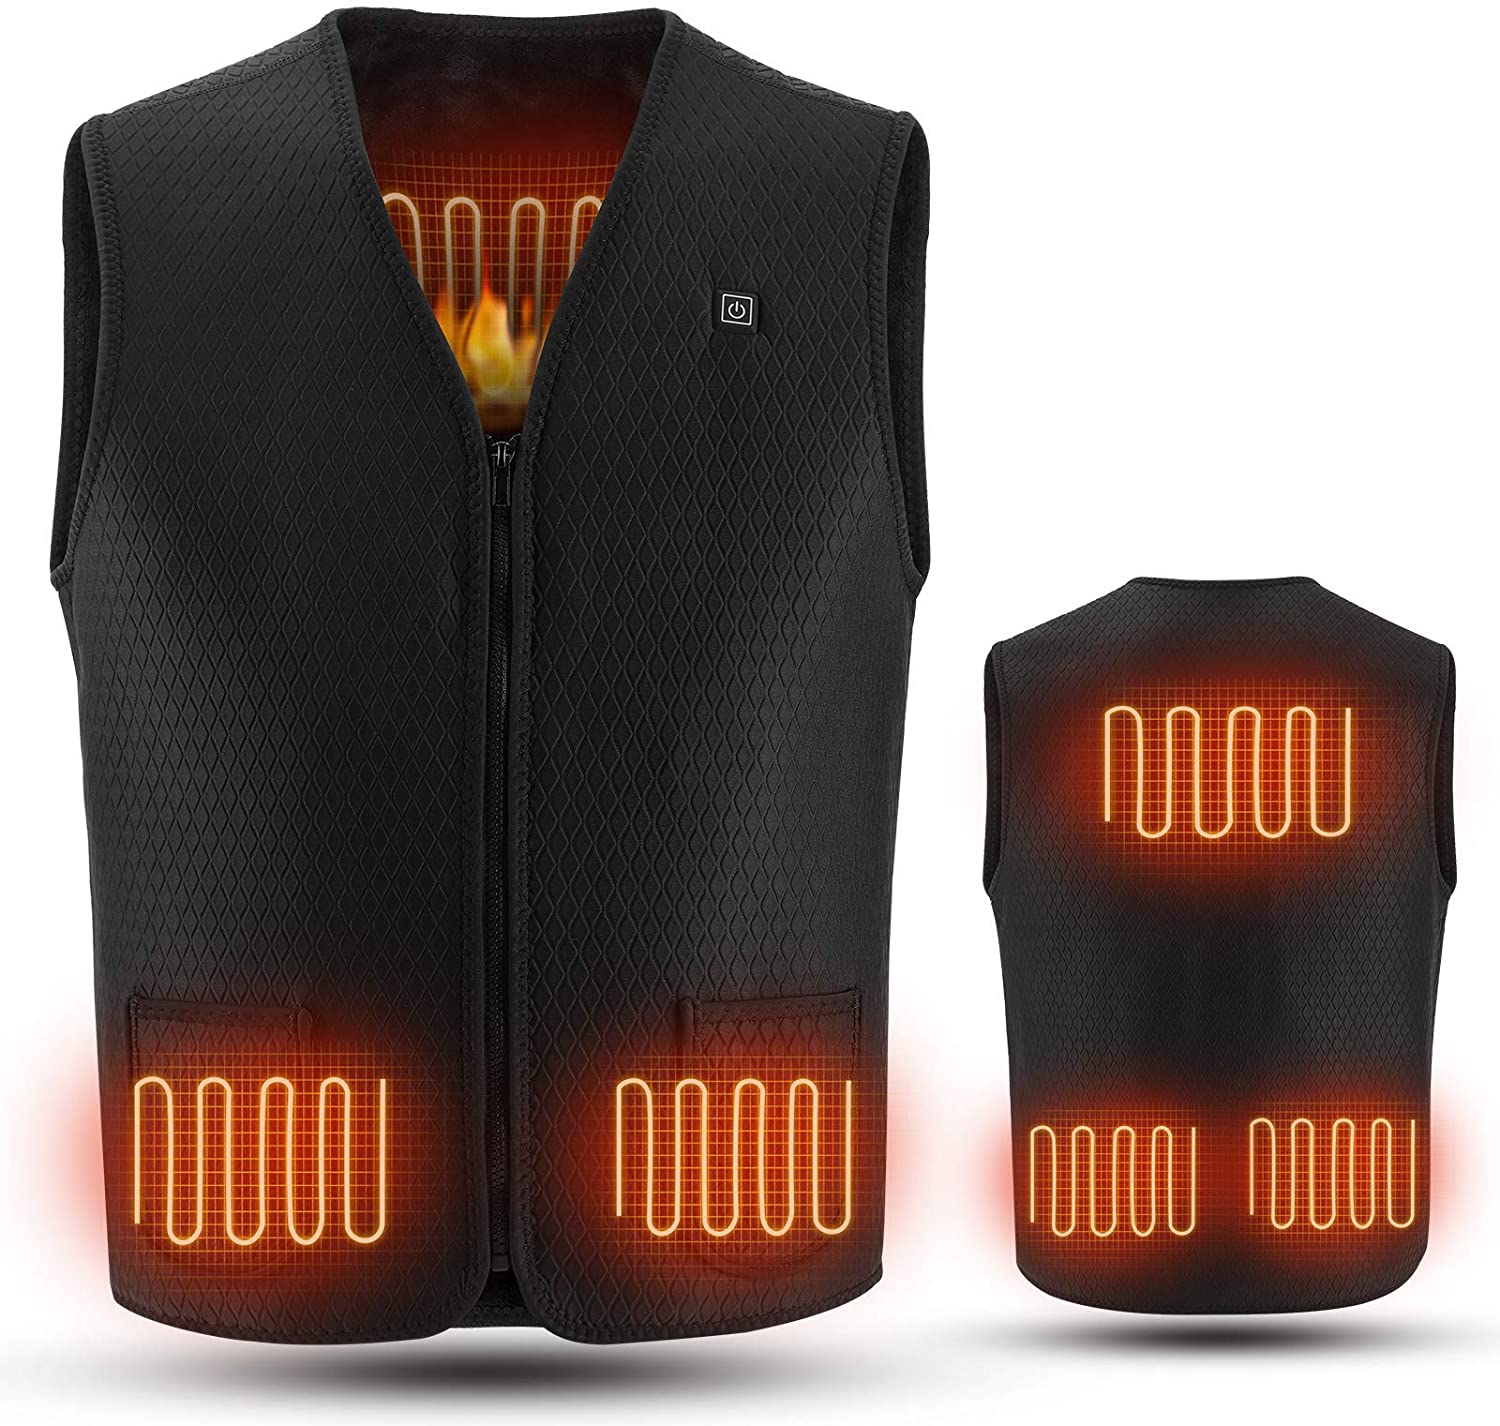 128ve980 Women Men Heated Vest with 10000mAh battery, Washable USB Charging Electric Heated Jacket